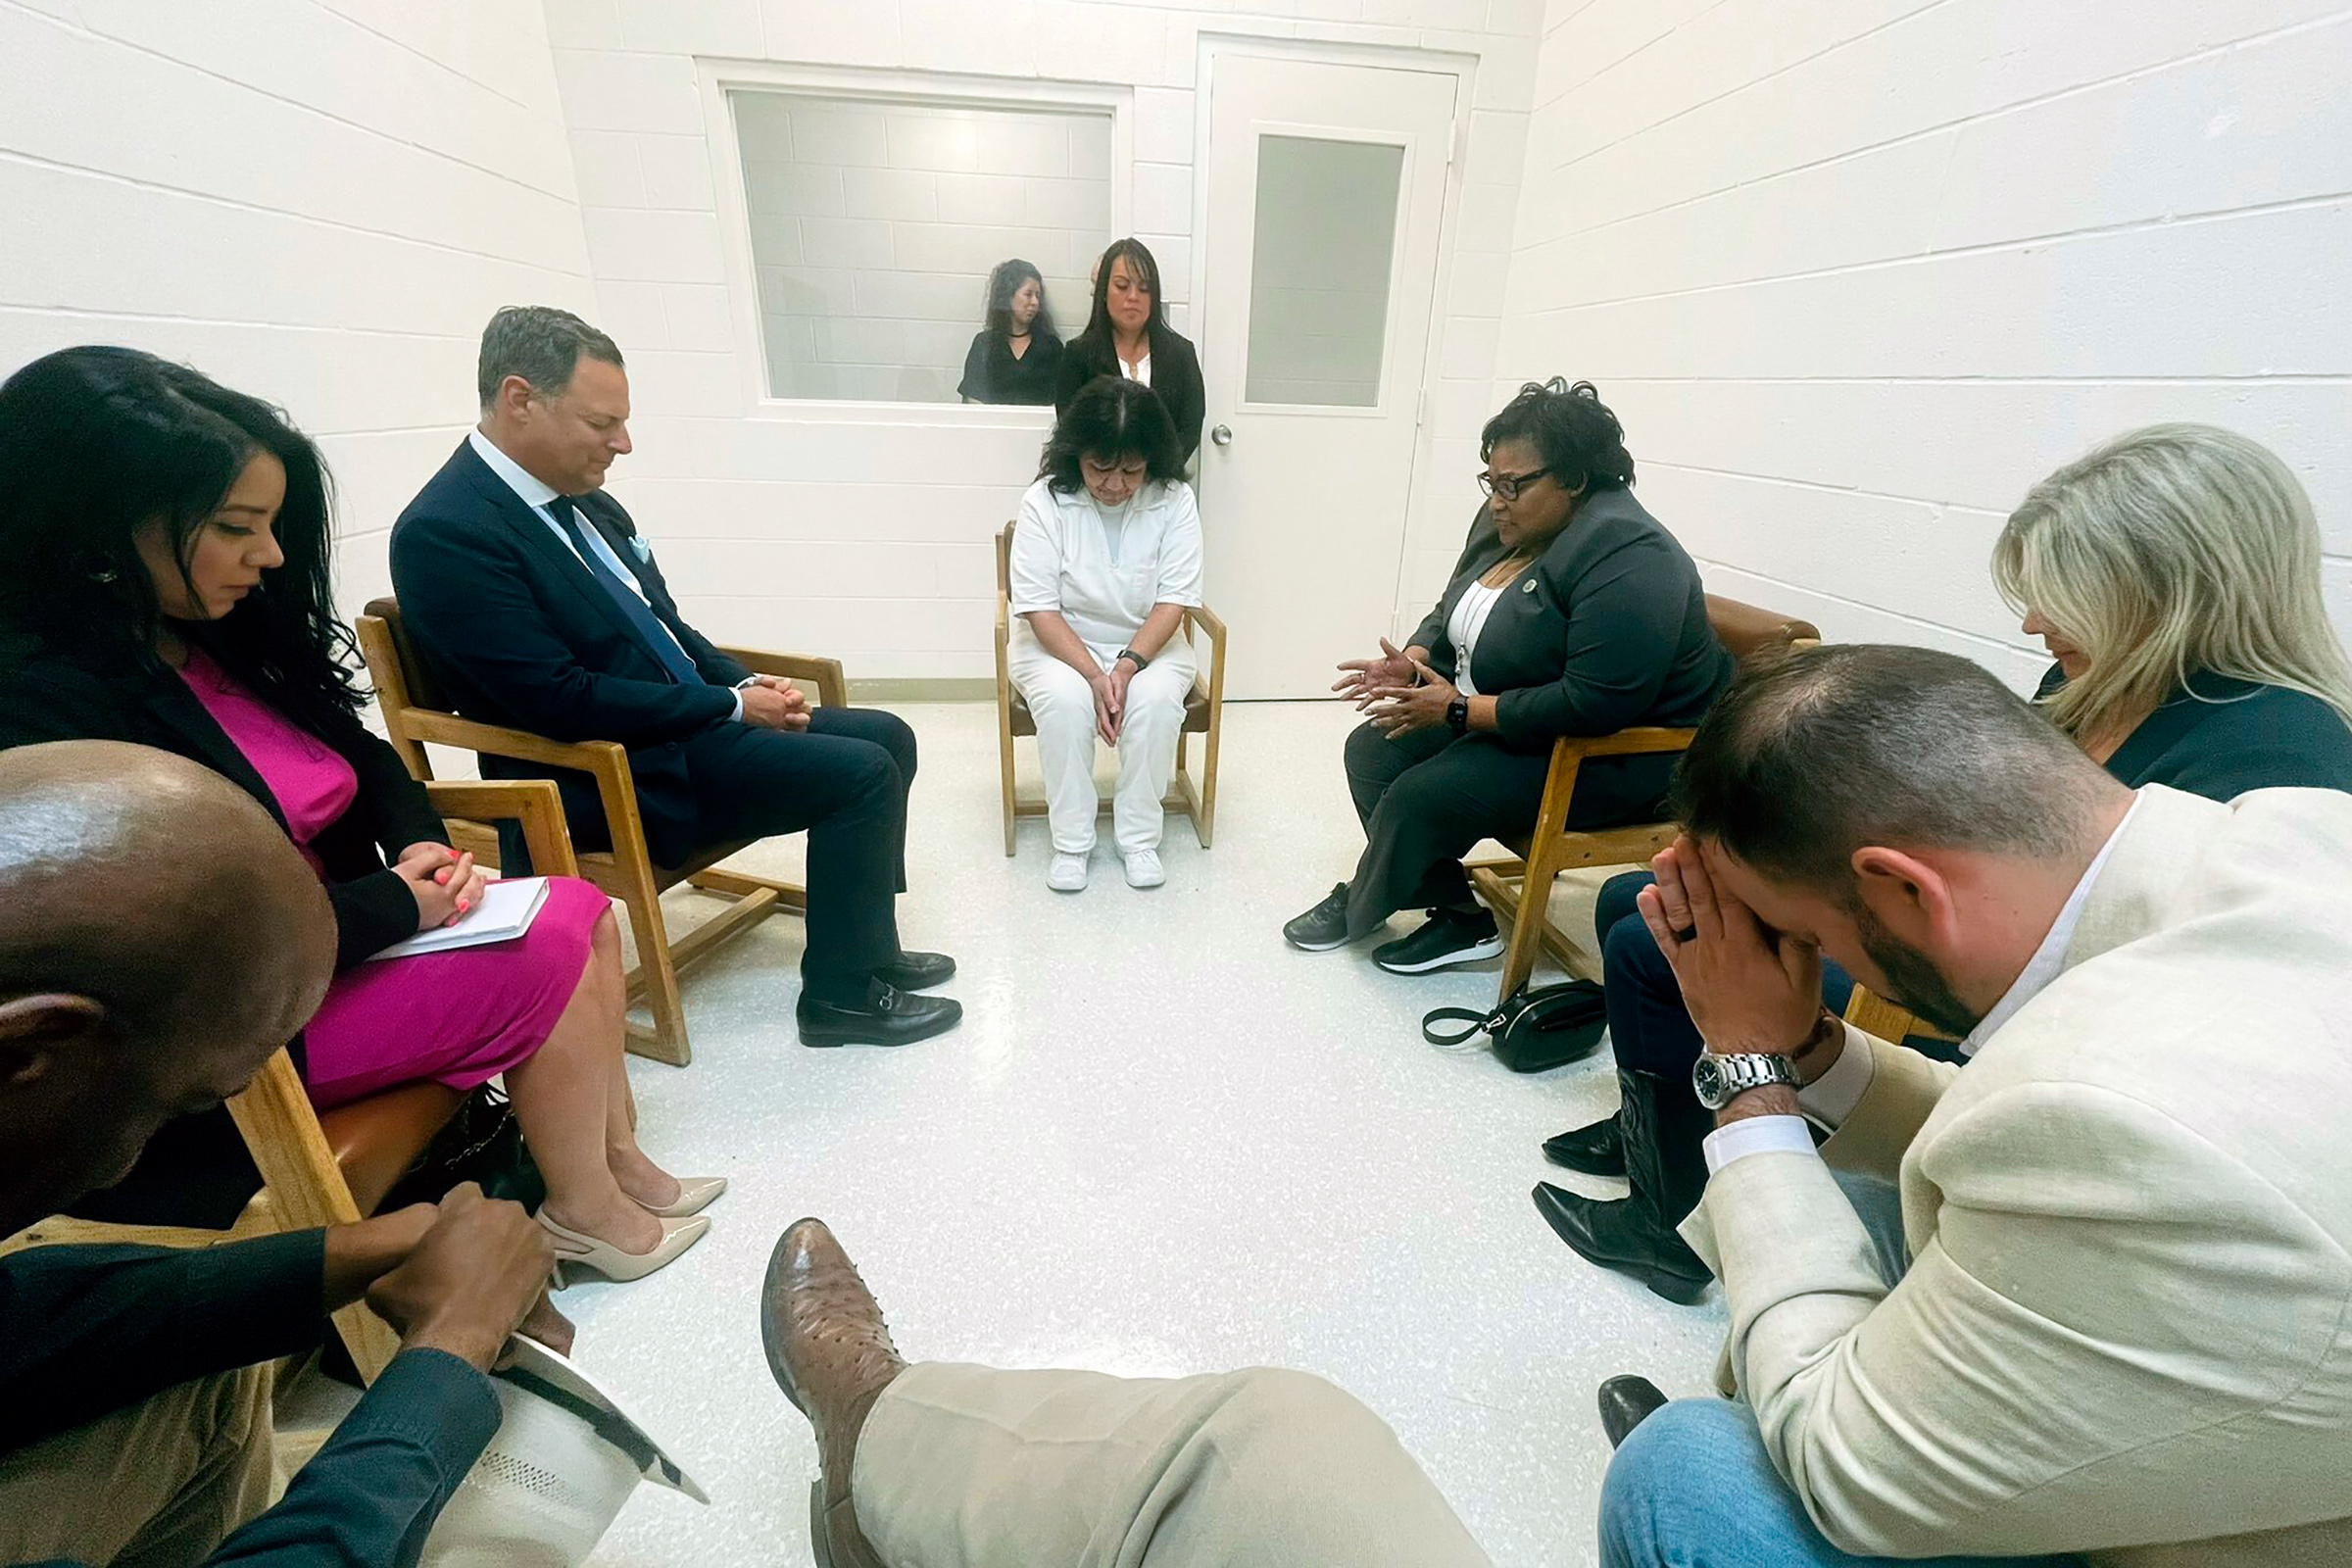 Melissa Lucio, center, leads a group of seven Texas lawmakers in prayer in a room at the Mountain View Unit in Gatesville, Texas, on April 6, 2022.